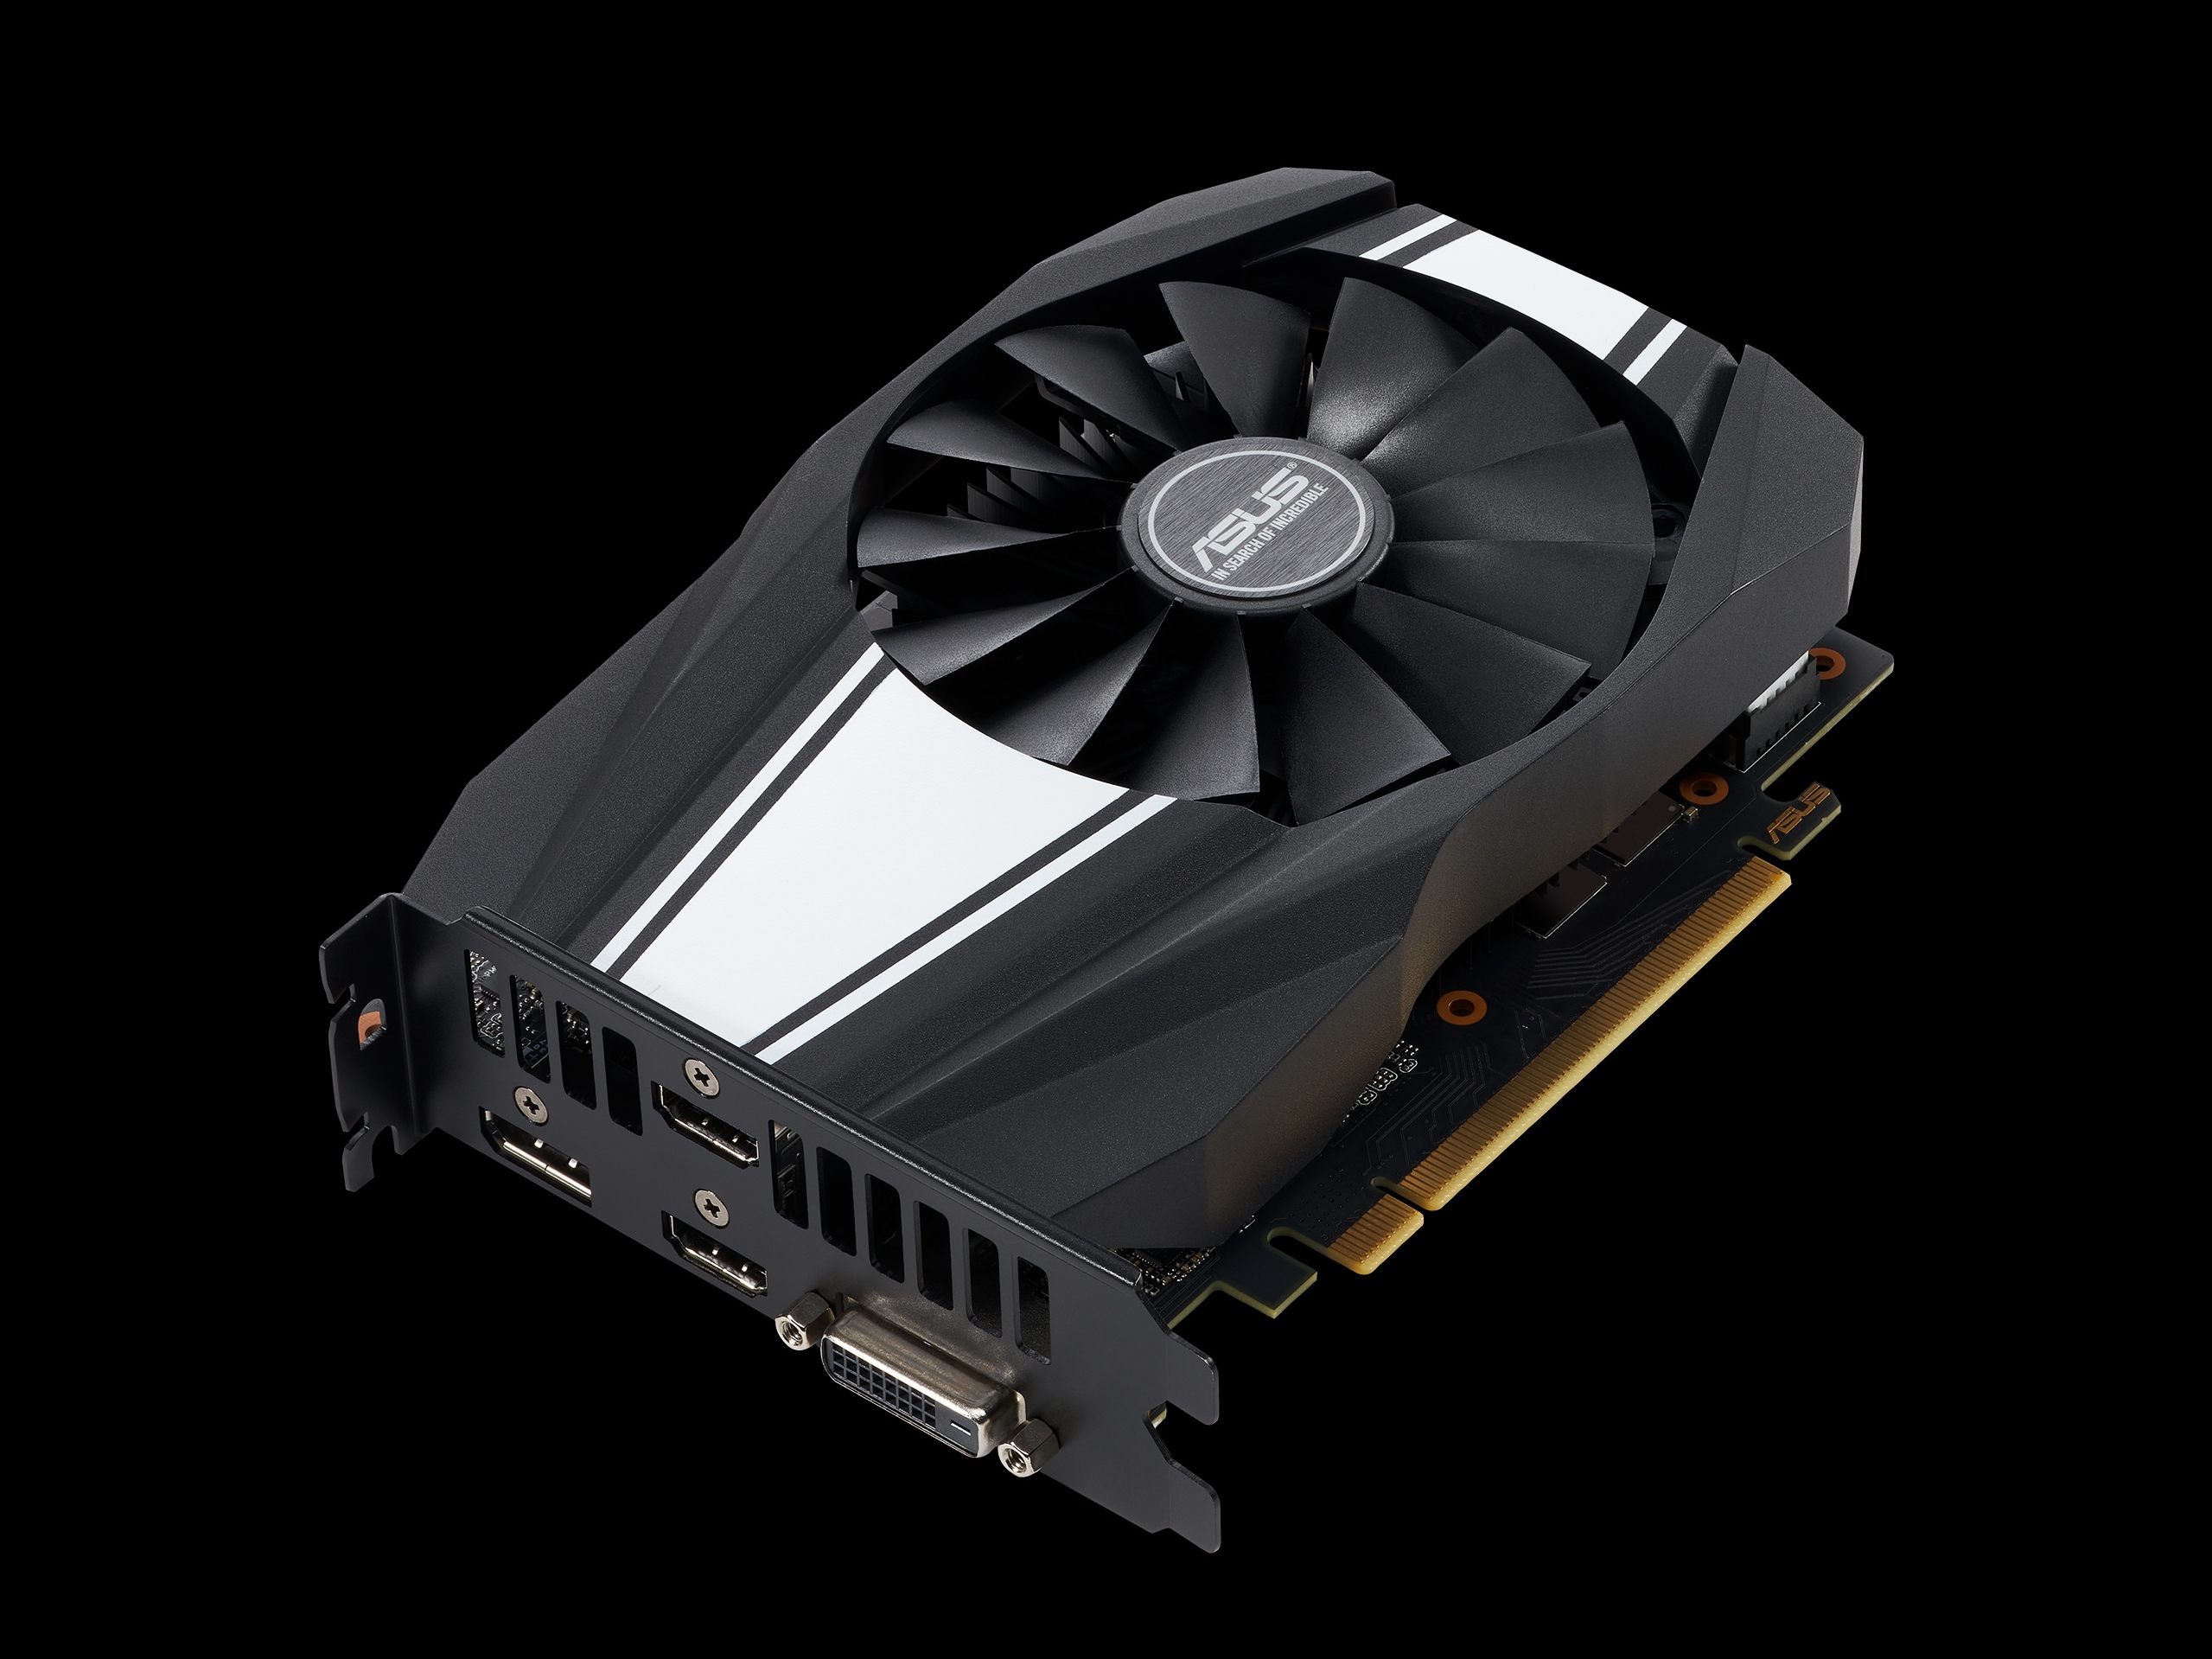 GeForce RTX 2060 is only 5 to 10 